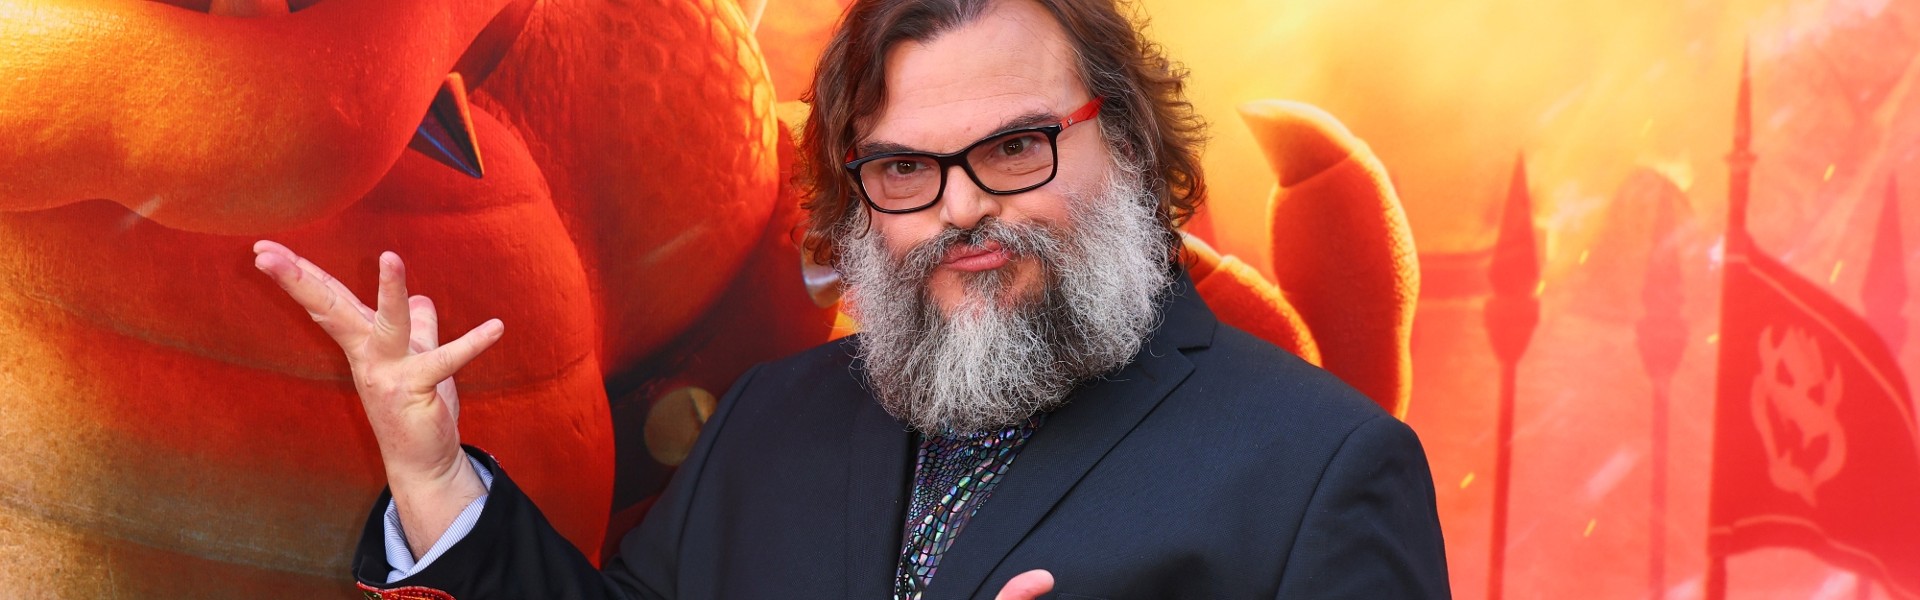 Jack Black alongside Jason Momoa in the actor’s adaptation of the game “Minecraft”